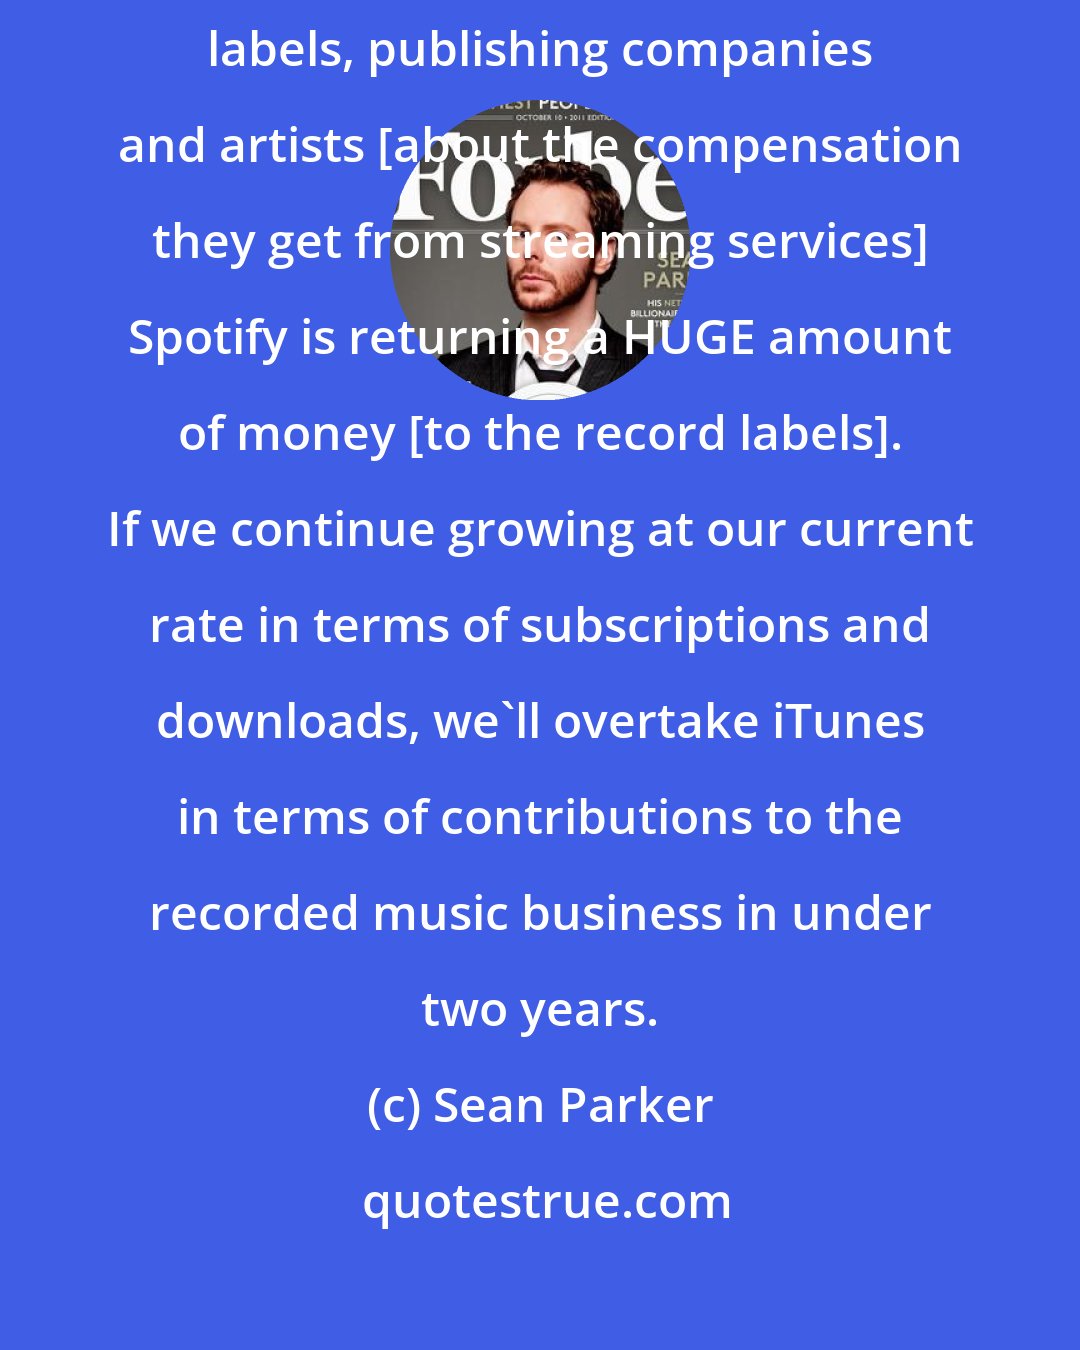 Sean Parker: There's definitely some sort of dissent brewing between record labels, publishing companies and artists [about the compensation they get from streaming services] Spotify is returning a HUGE amount of money [to the record labels]. If we continue growing at our current rate in terms of subscriptions and downloads, we'll overtake iTunes in terms of contributions to the recorded music business in under two years.